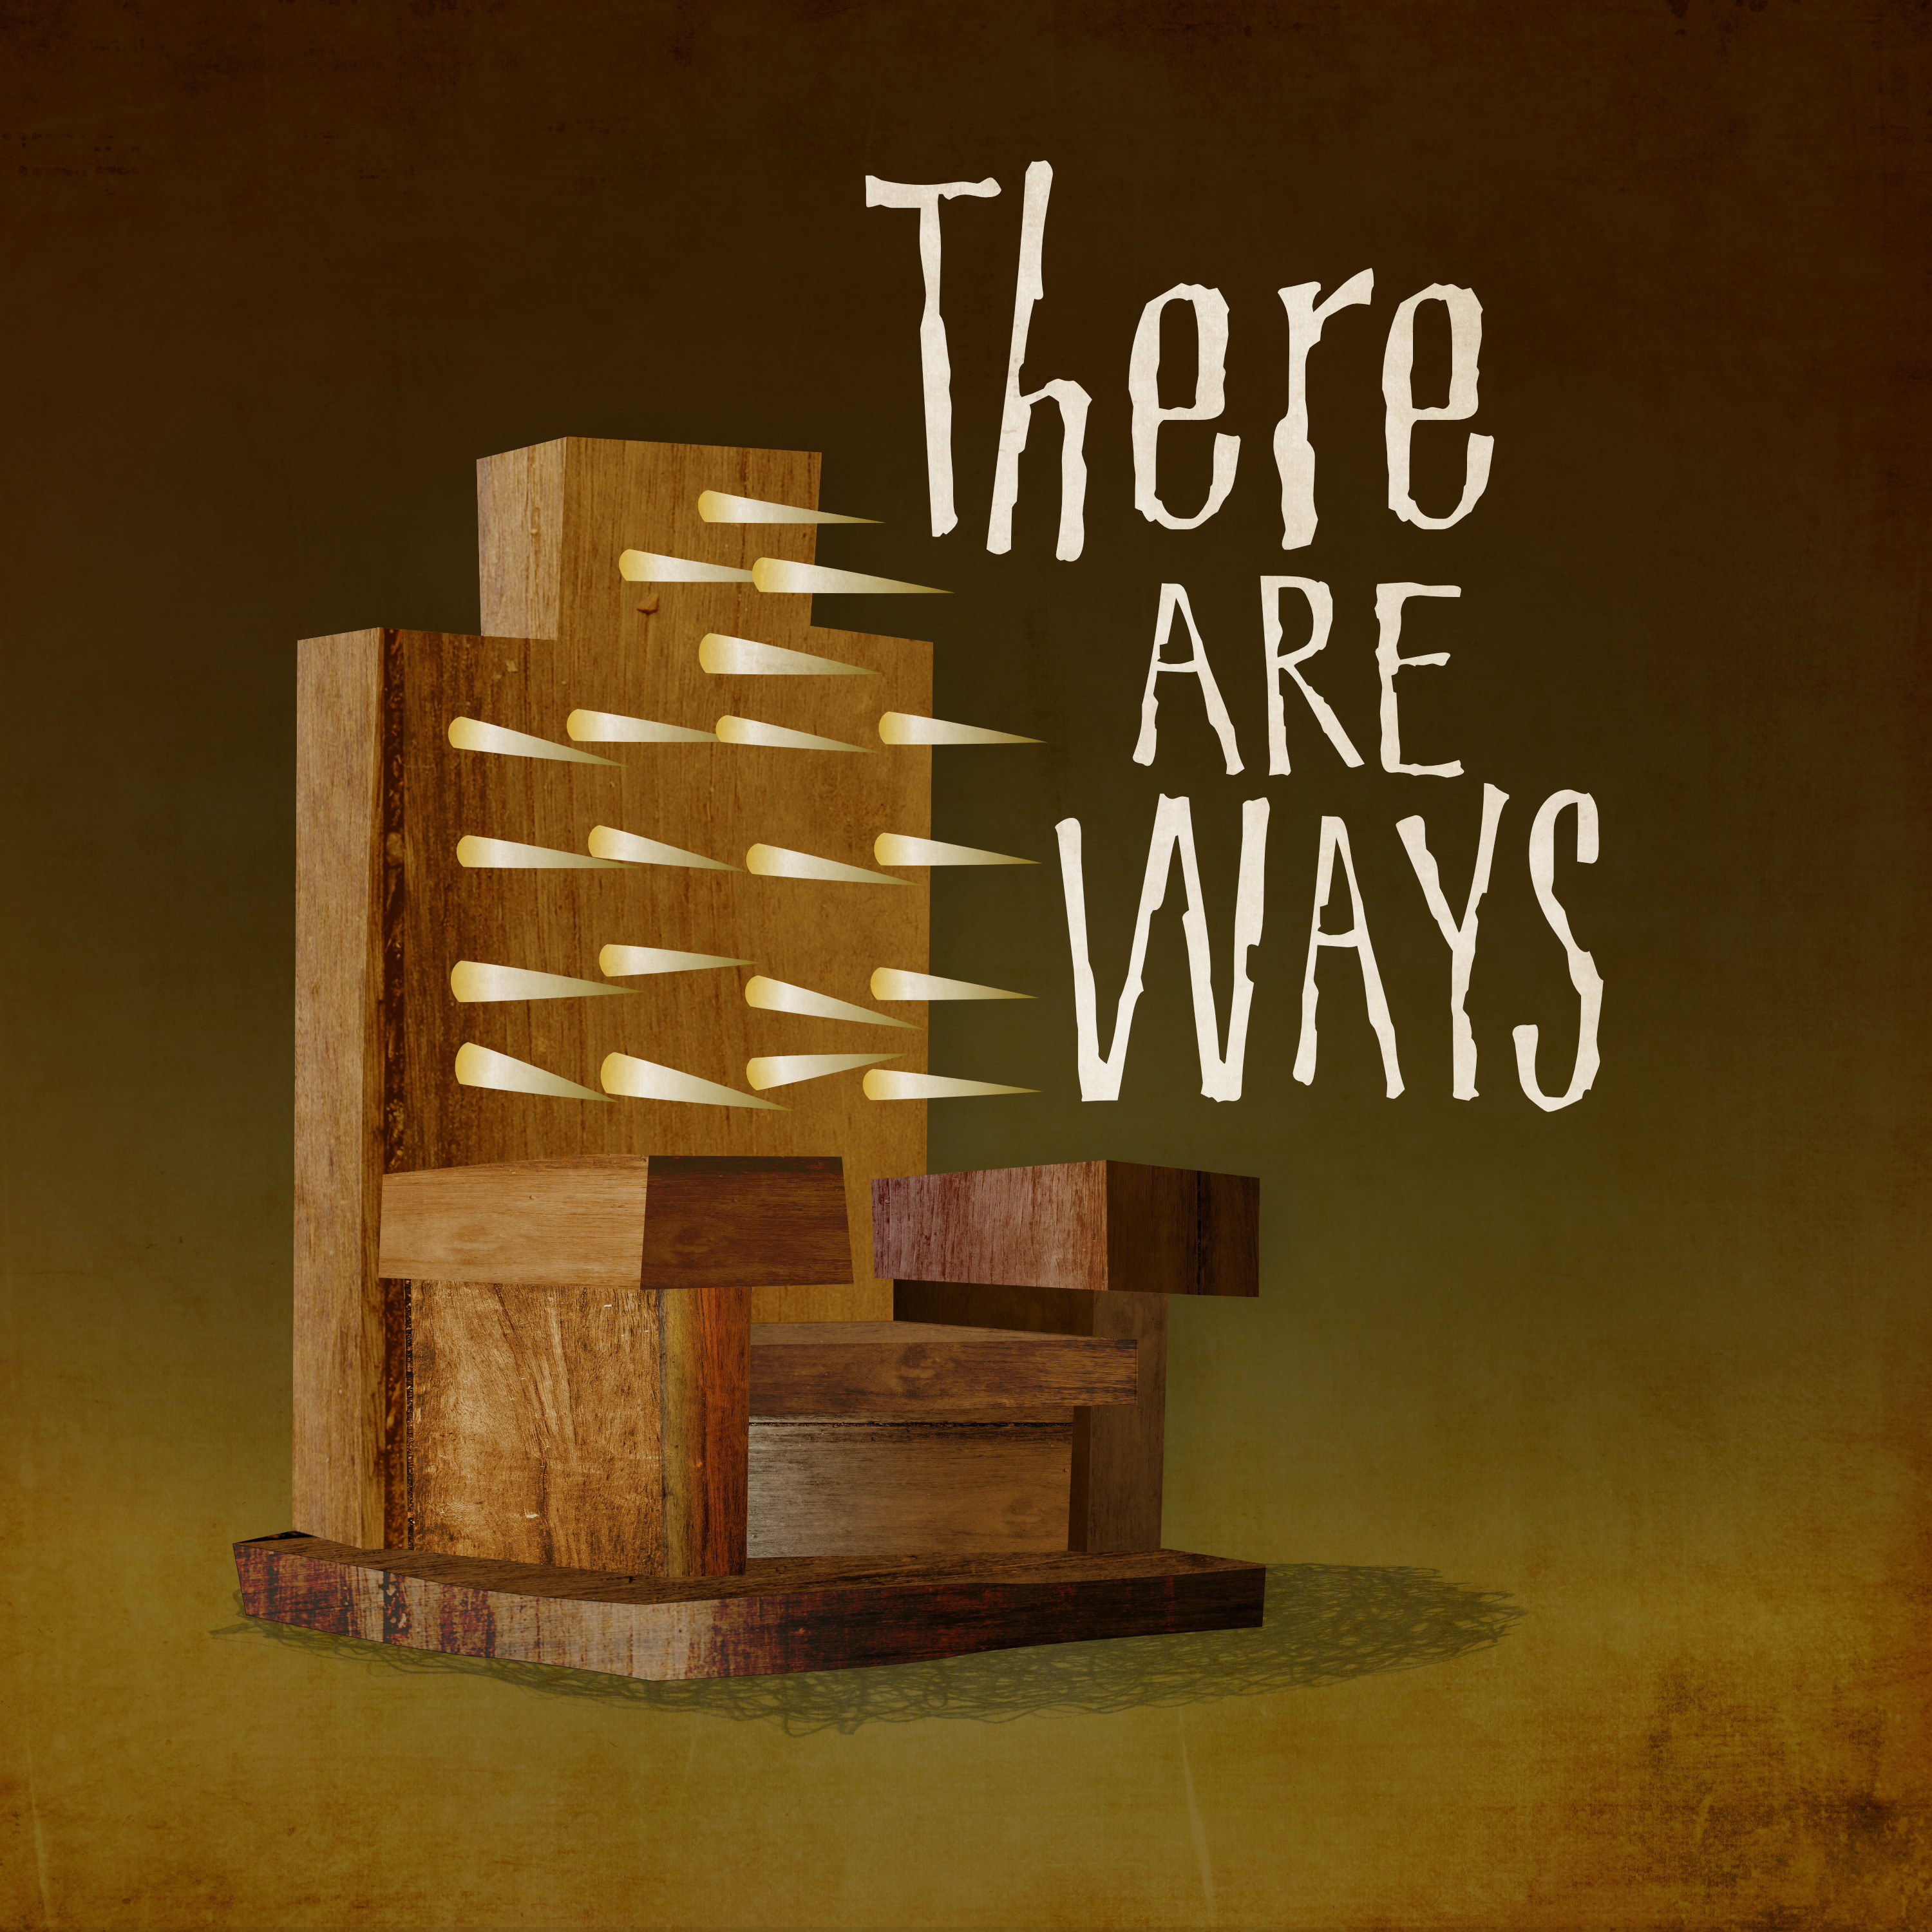 41. There are ways